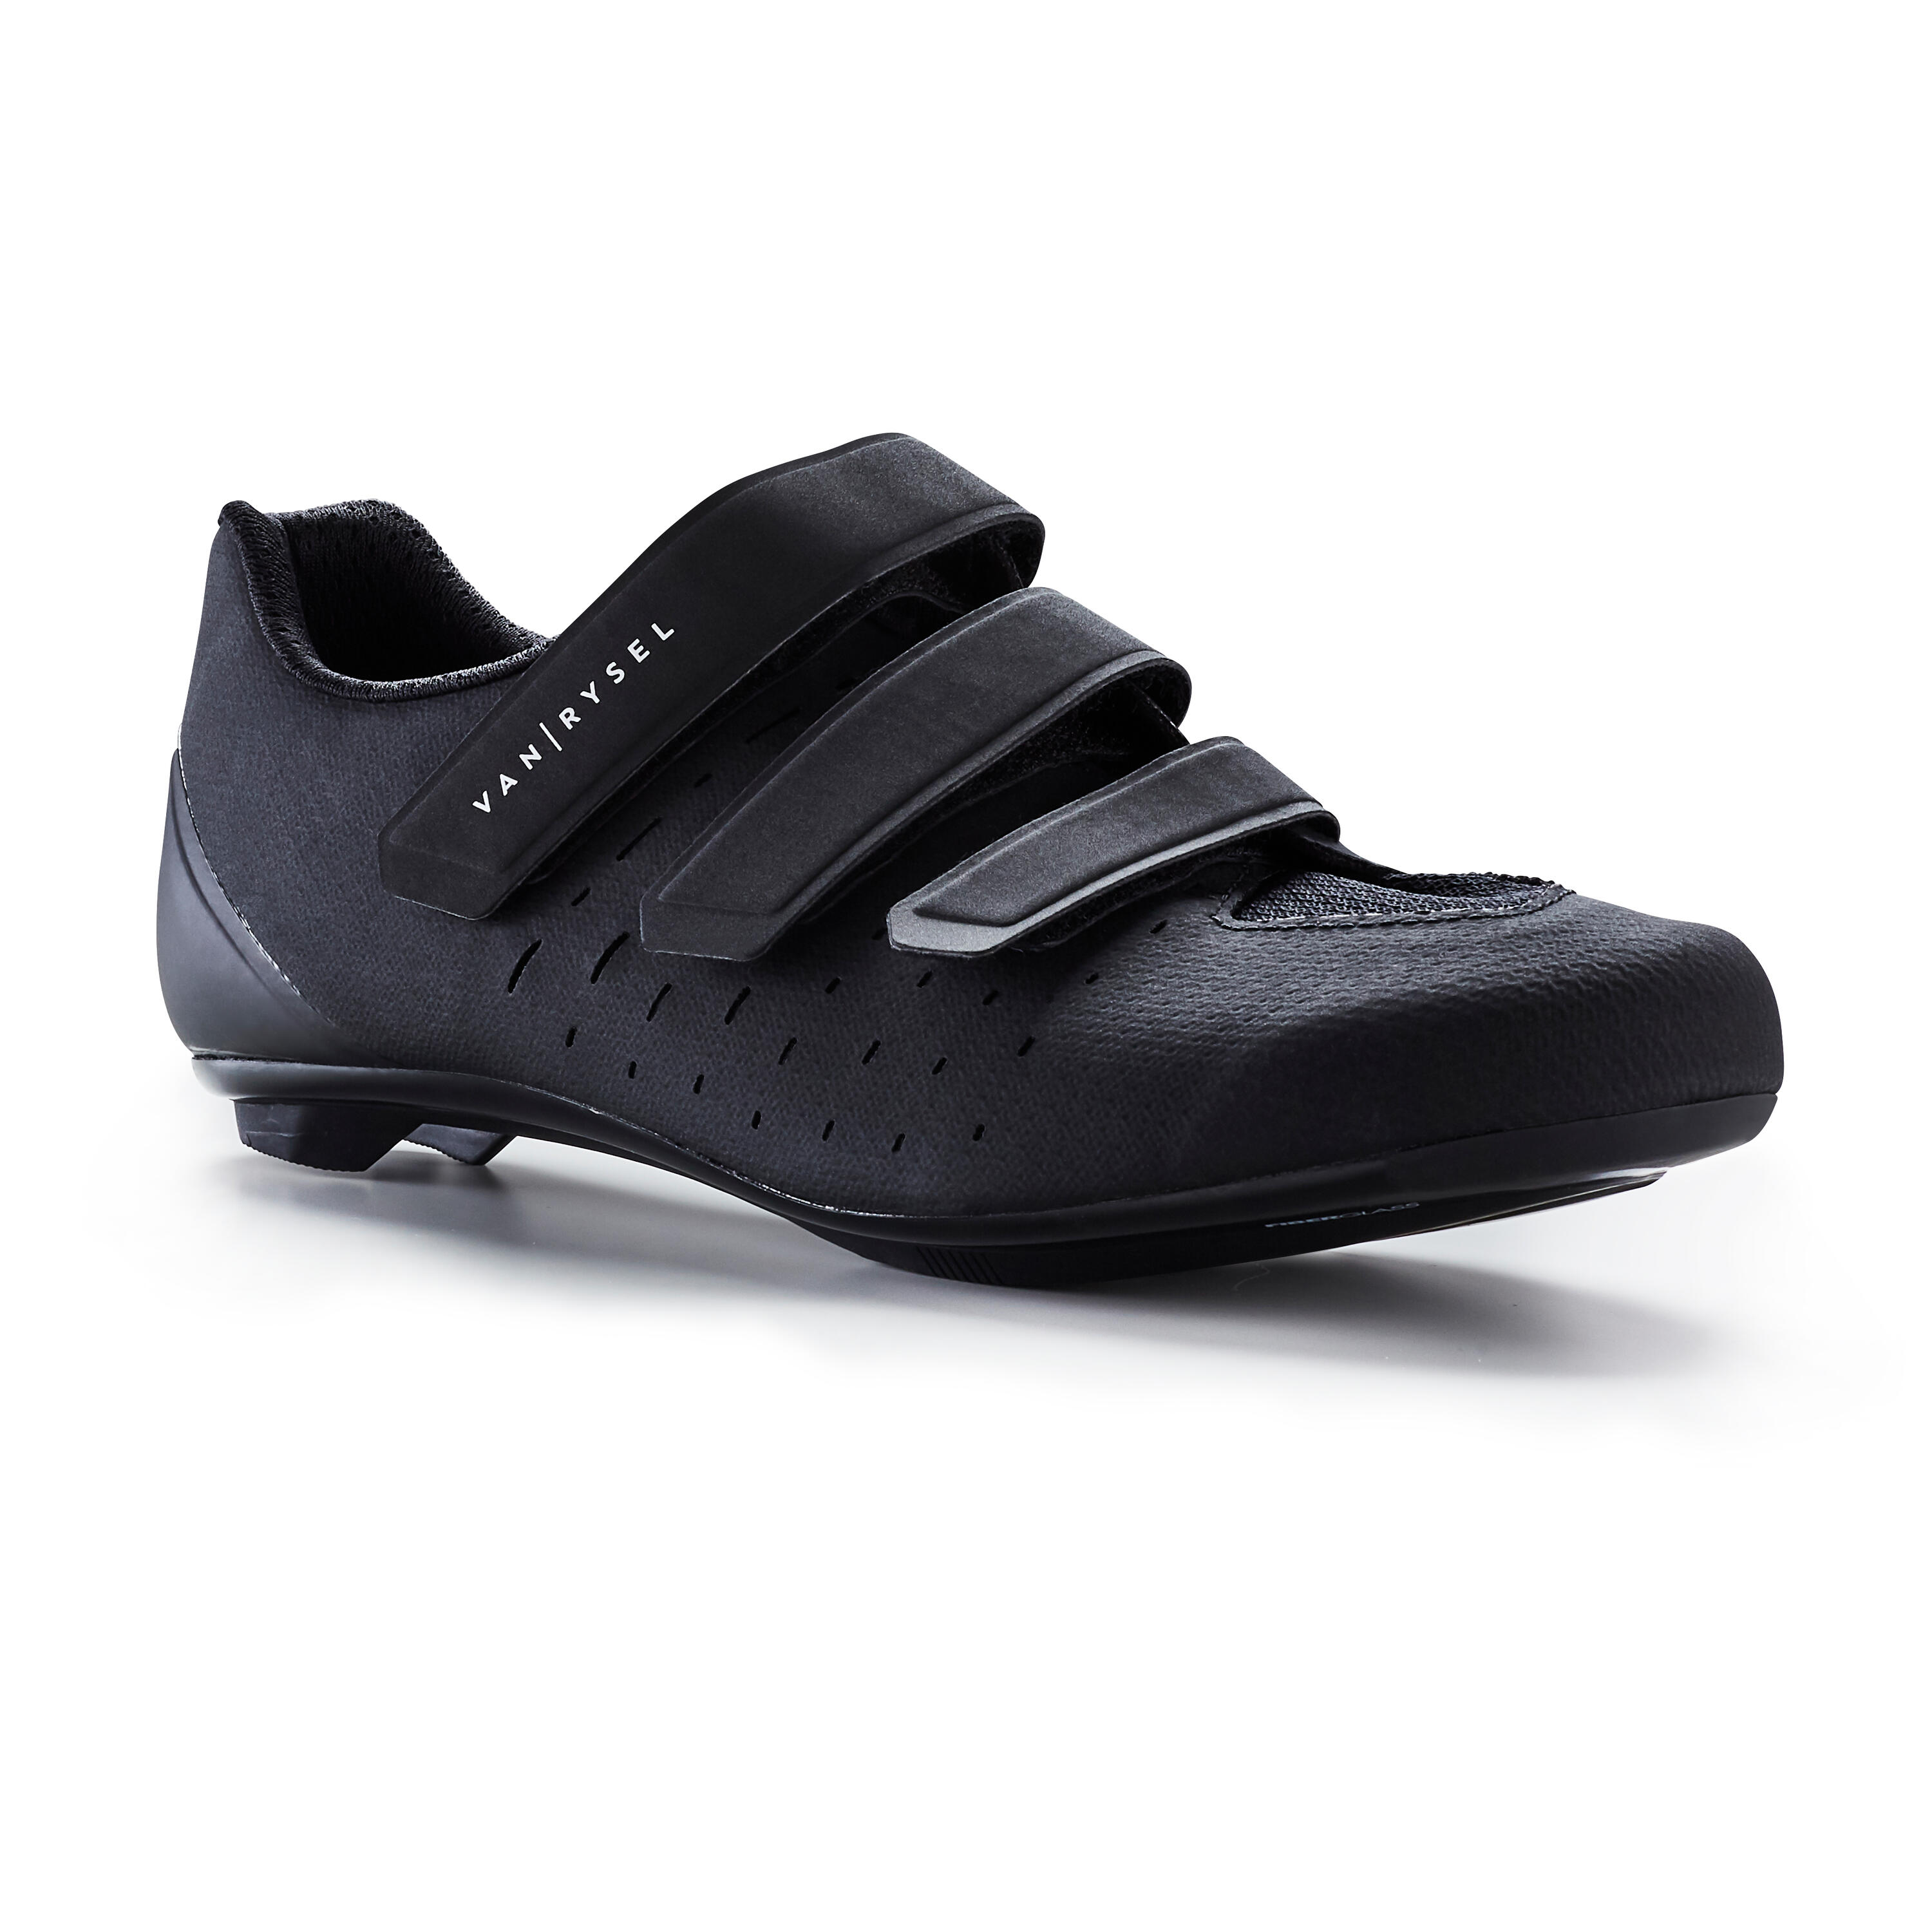 Cycling Shoes and Overshoes